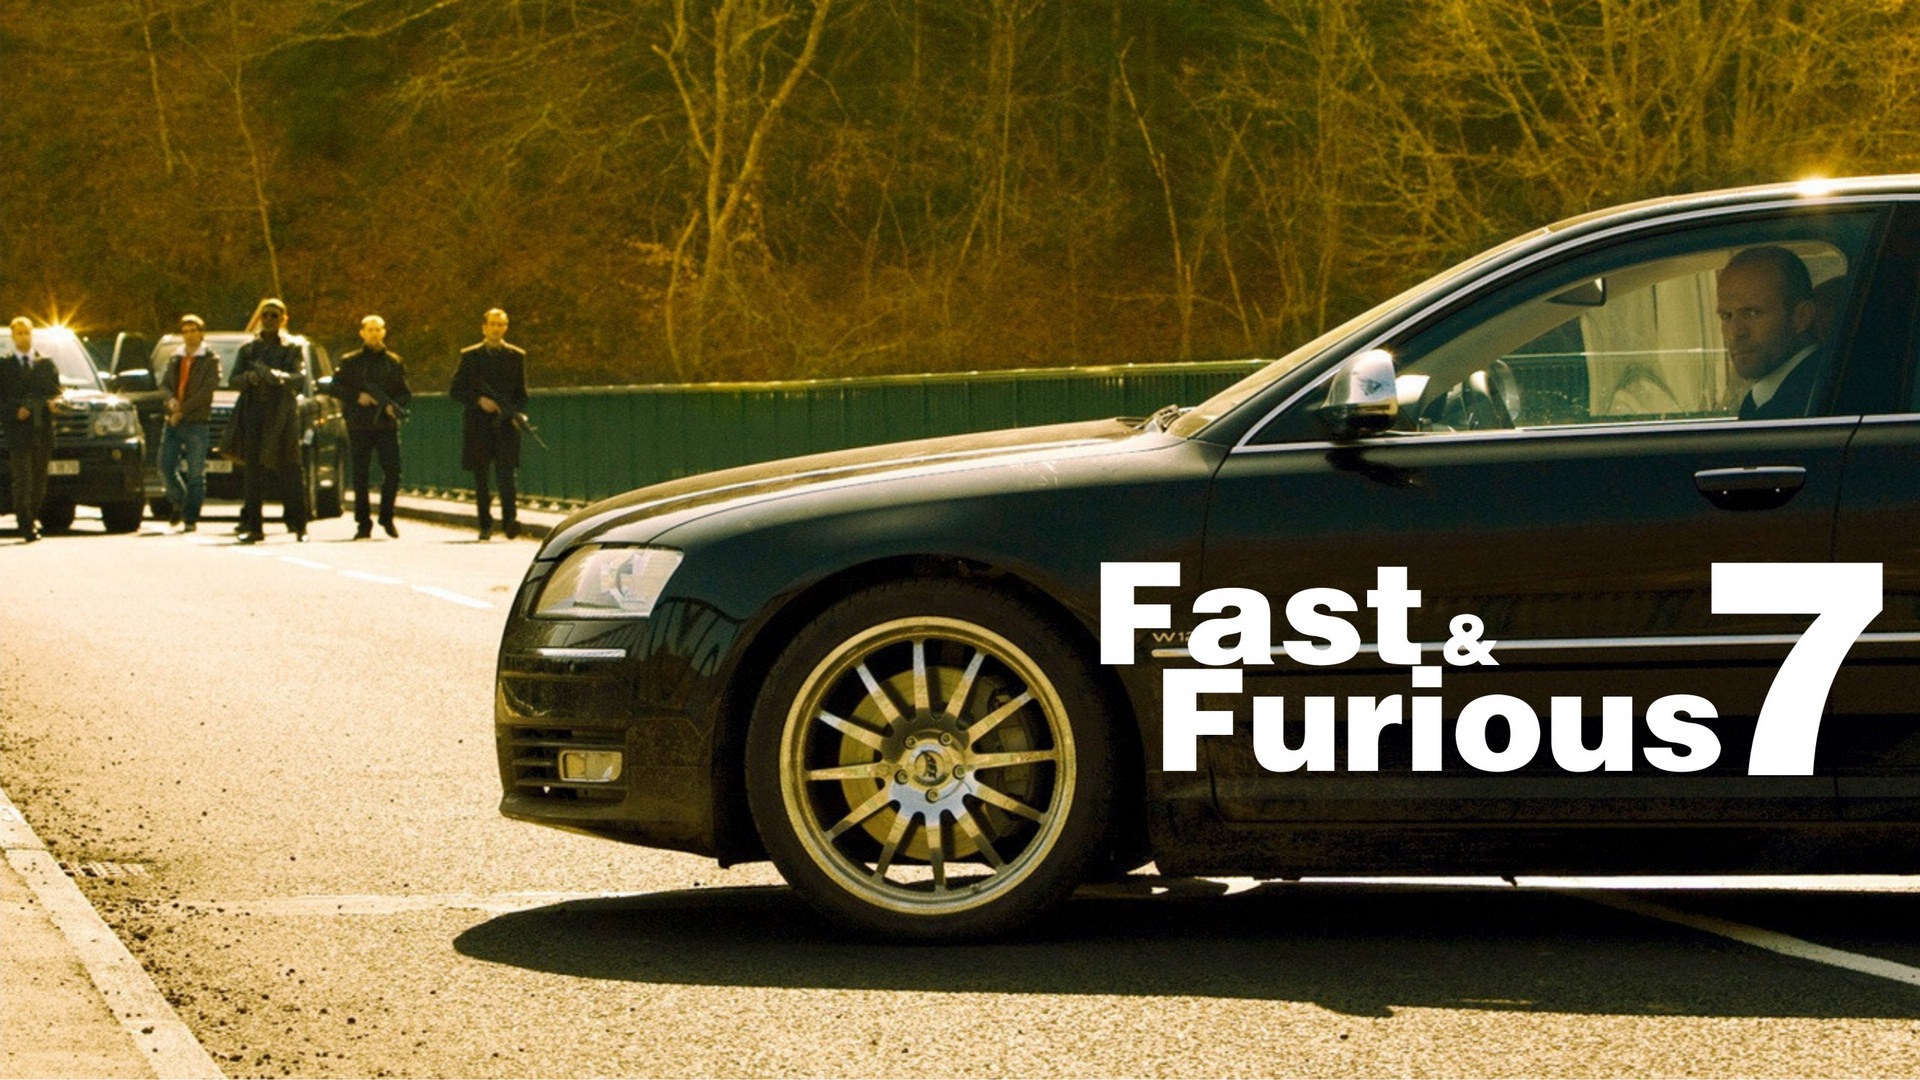 Fast and Furious 7 HD movie wallpapers #15 - 1920x1080